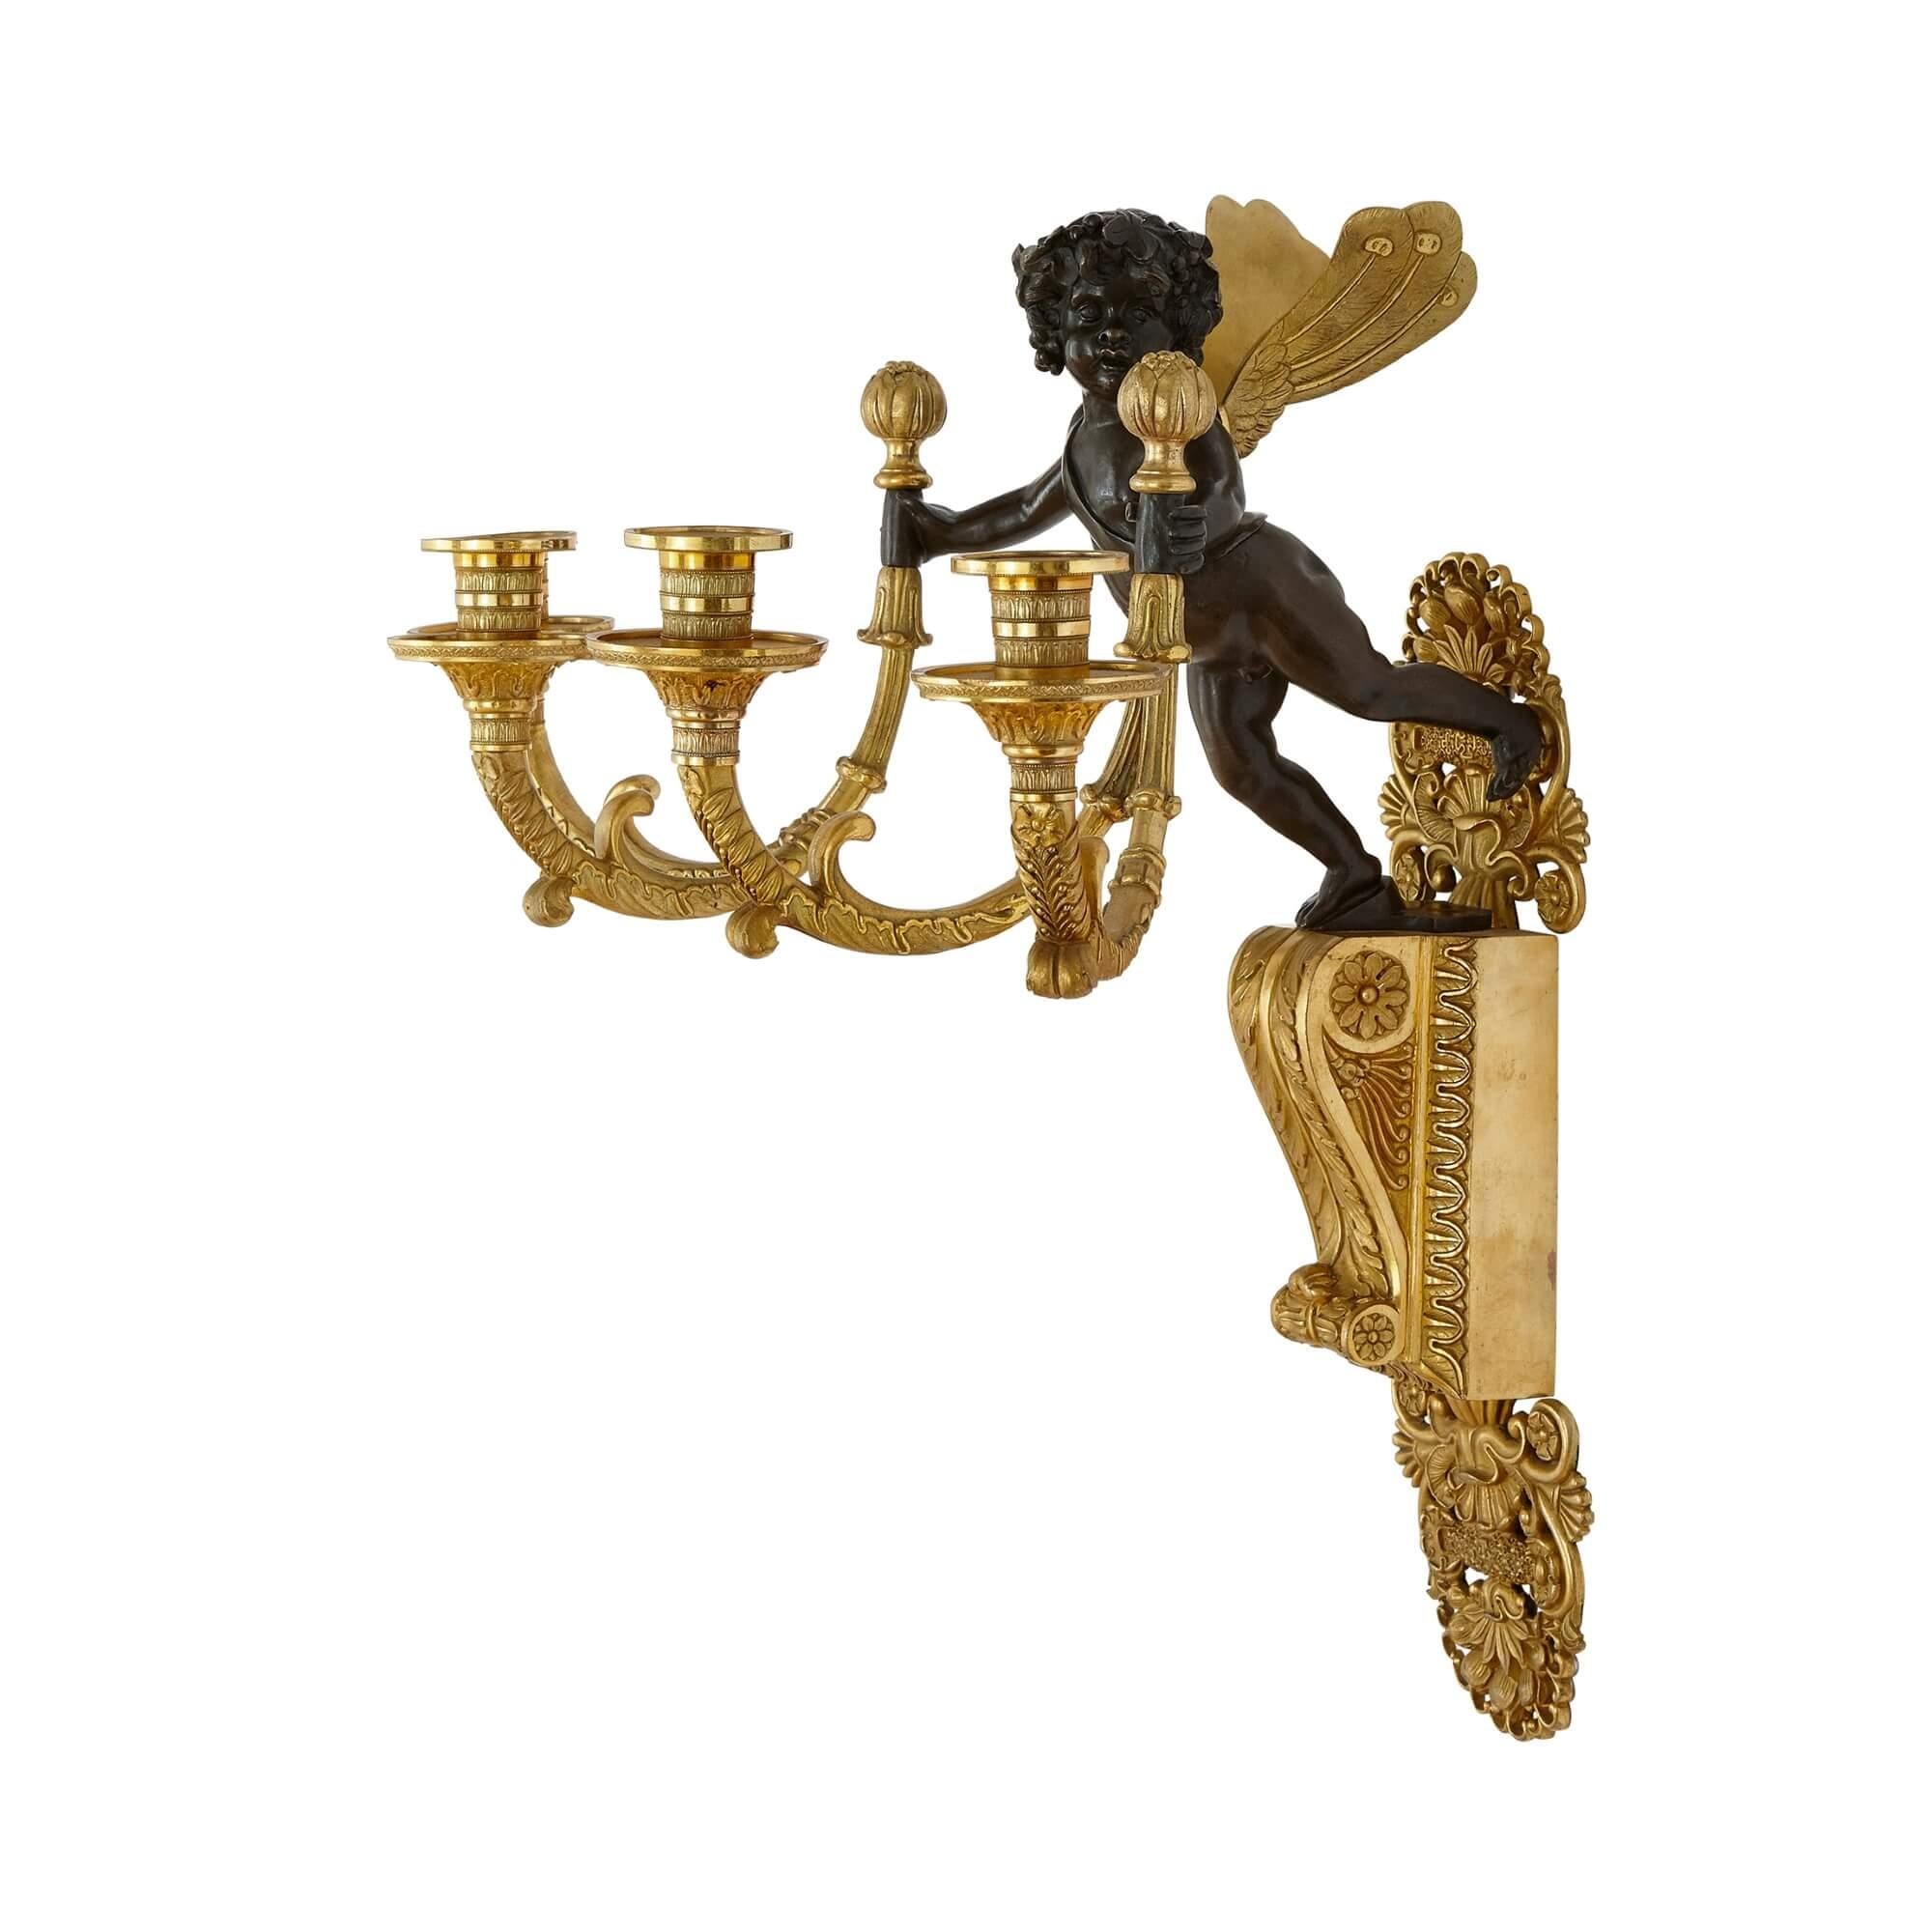 Dating from the Restauration period, these beautiful wall-lights combine a variety of stylistic influences to make a an exceptional pair of interior pieces. Each object features a winged putto descending from above, holding out a scrolling branch